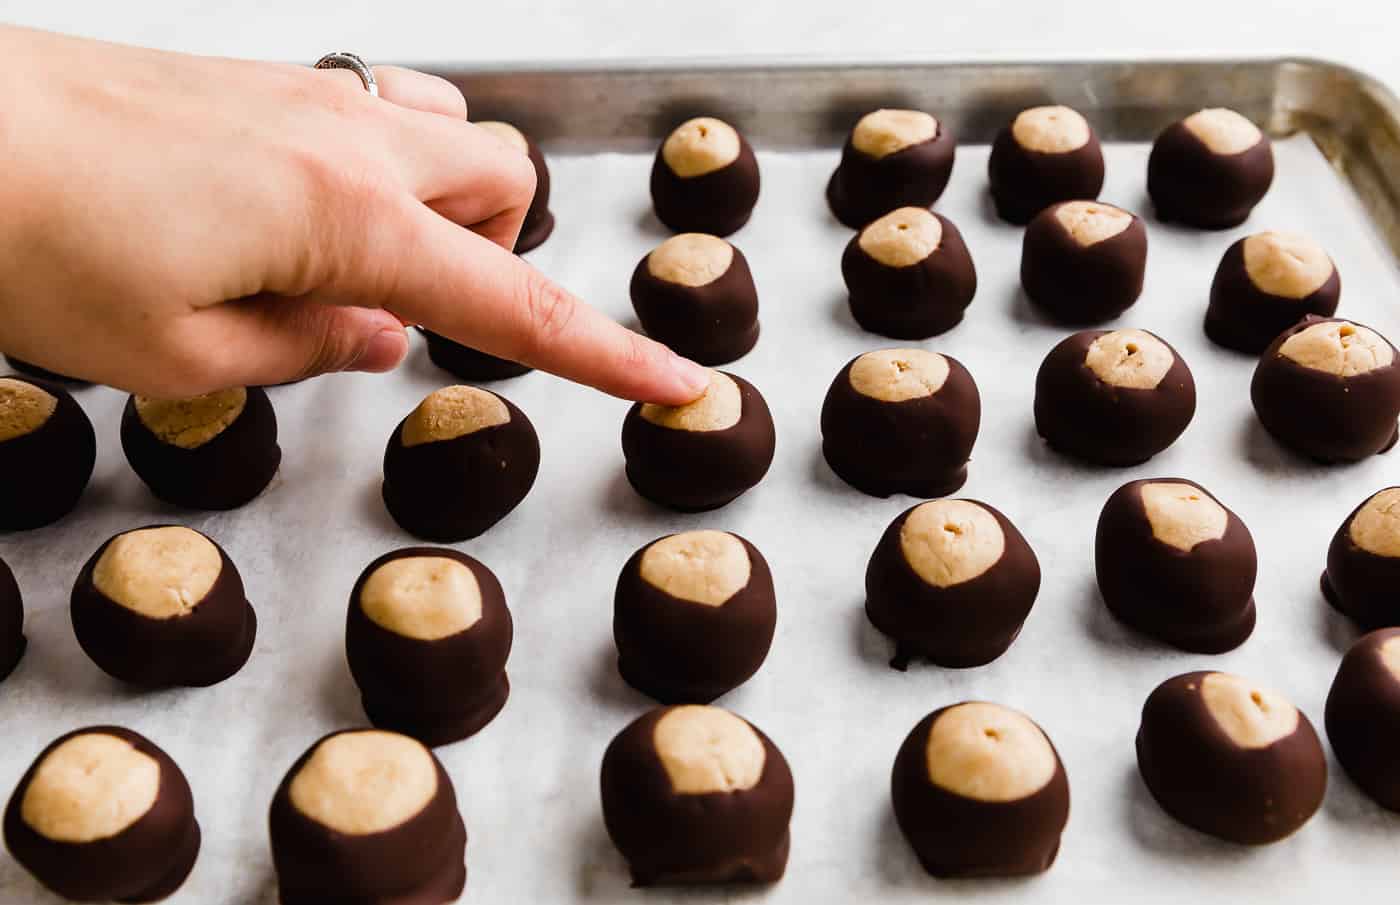 A finger touching a chocolate dipped buckeye.